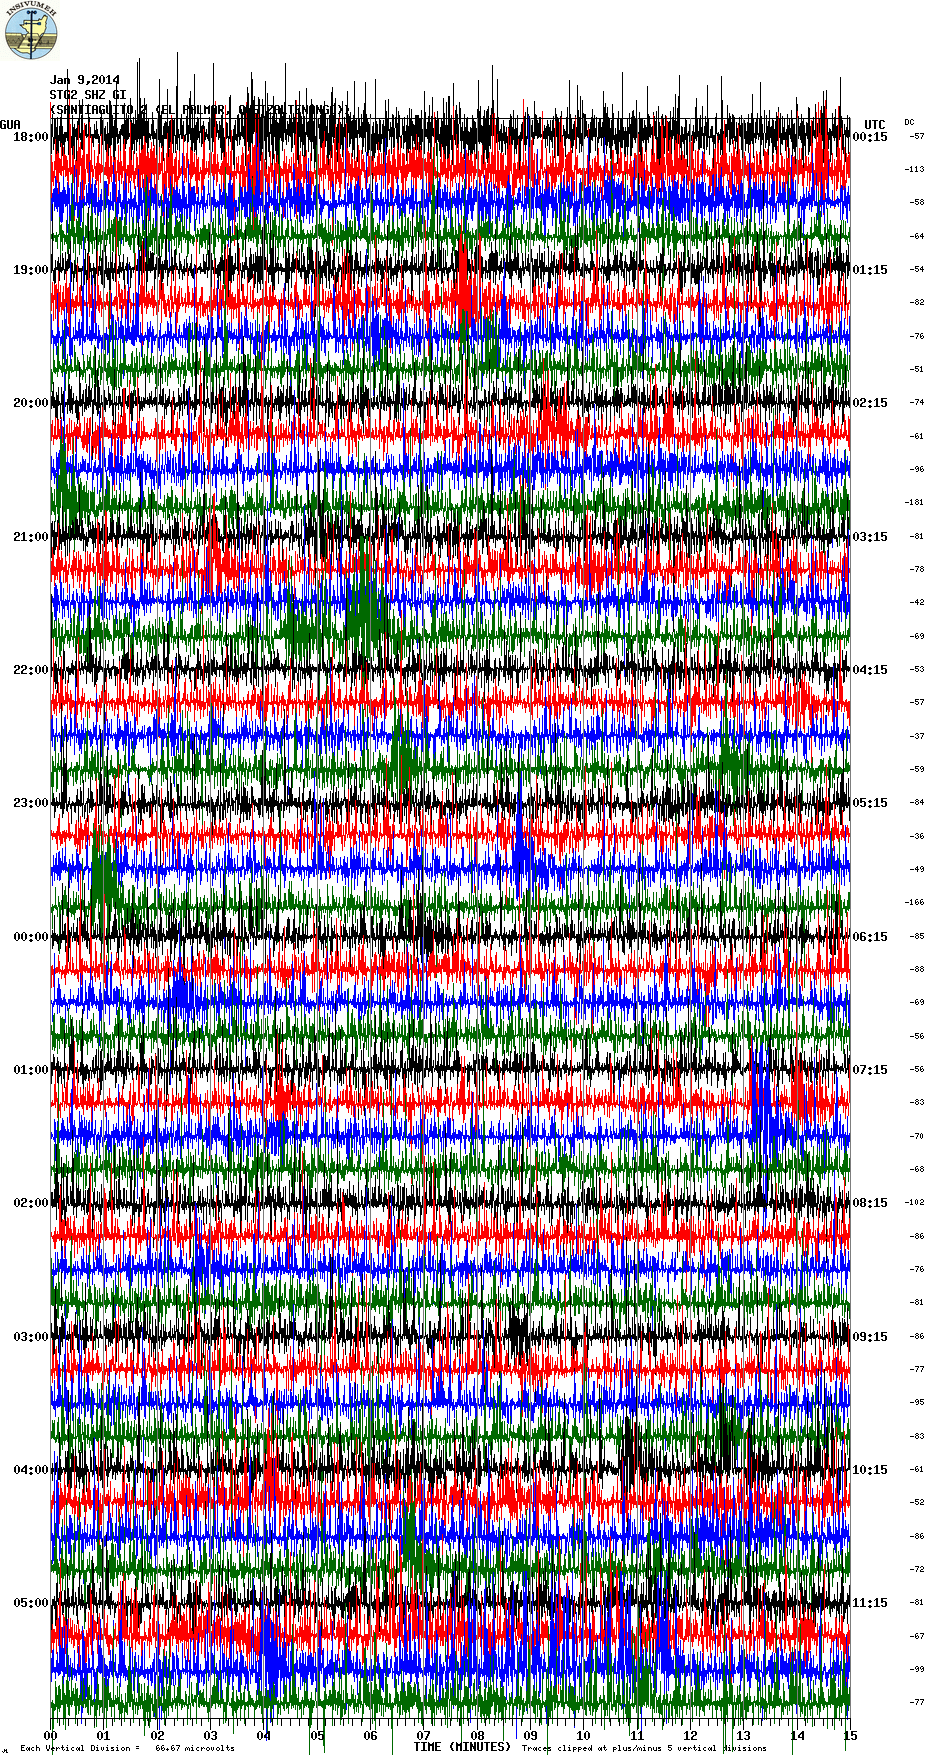 Seismic signal from Santiaguito showing continuous rockfalls (STG2 sttion, INSIVUMEH)